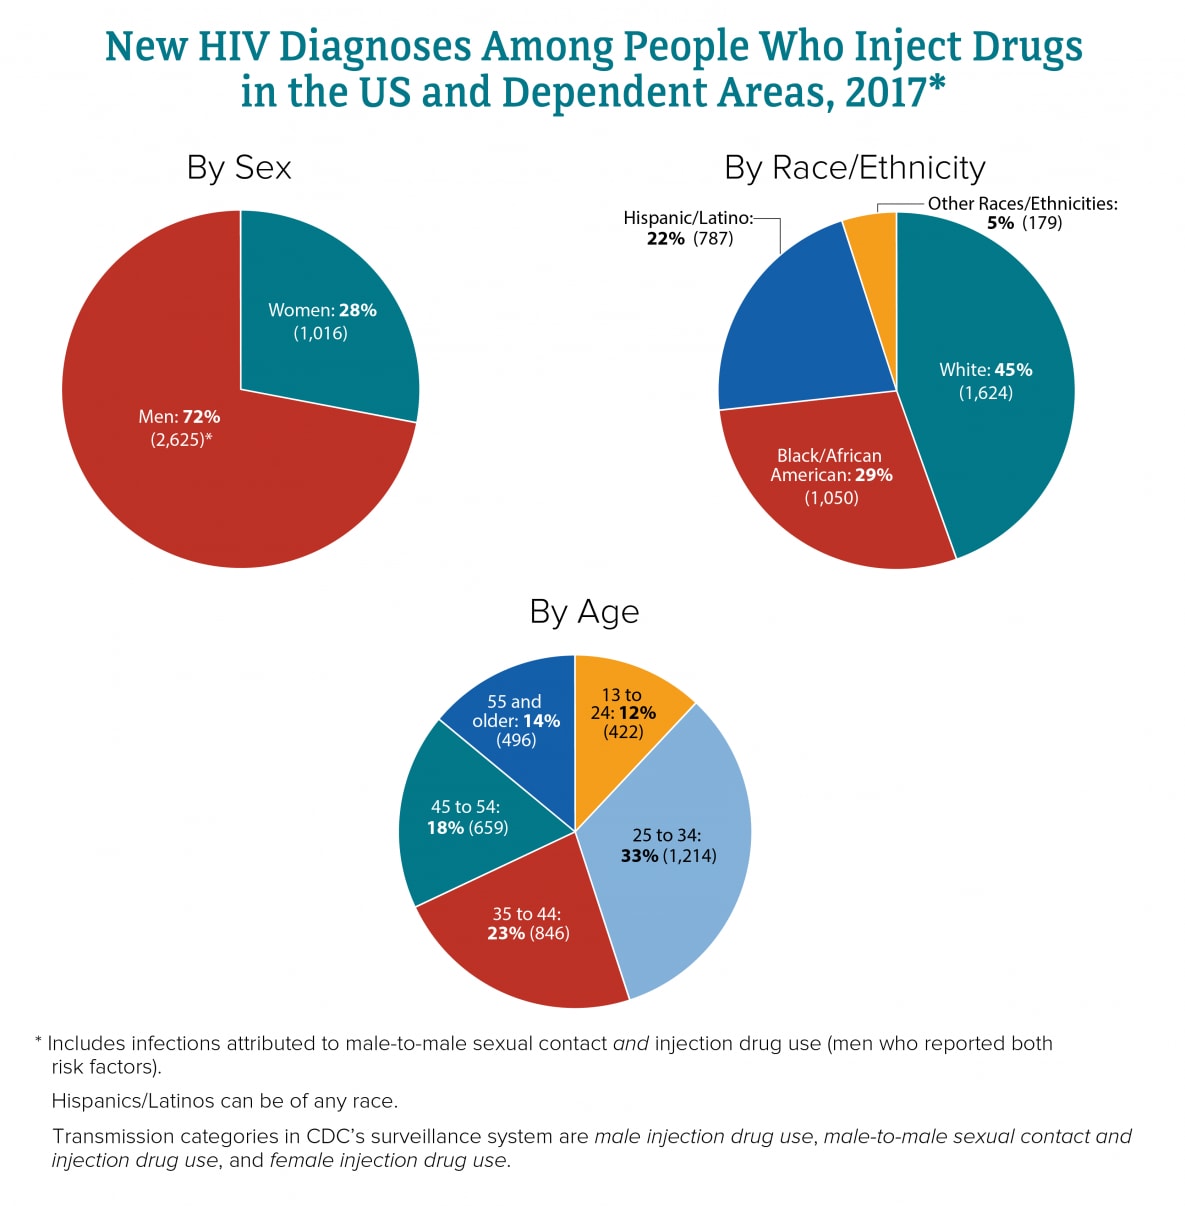 By Hiv-infected Injection Drug Users